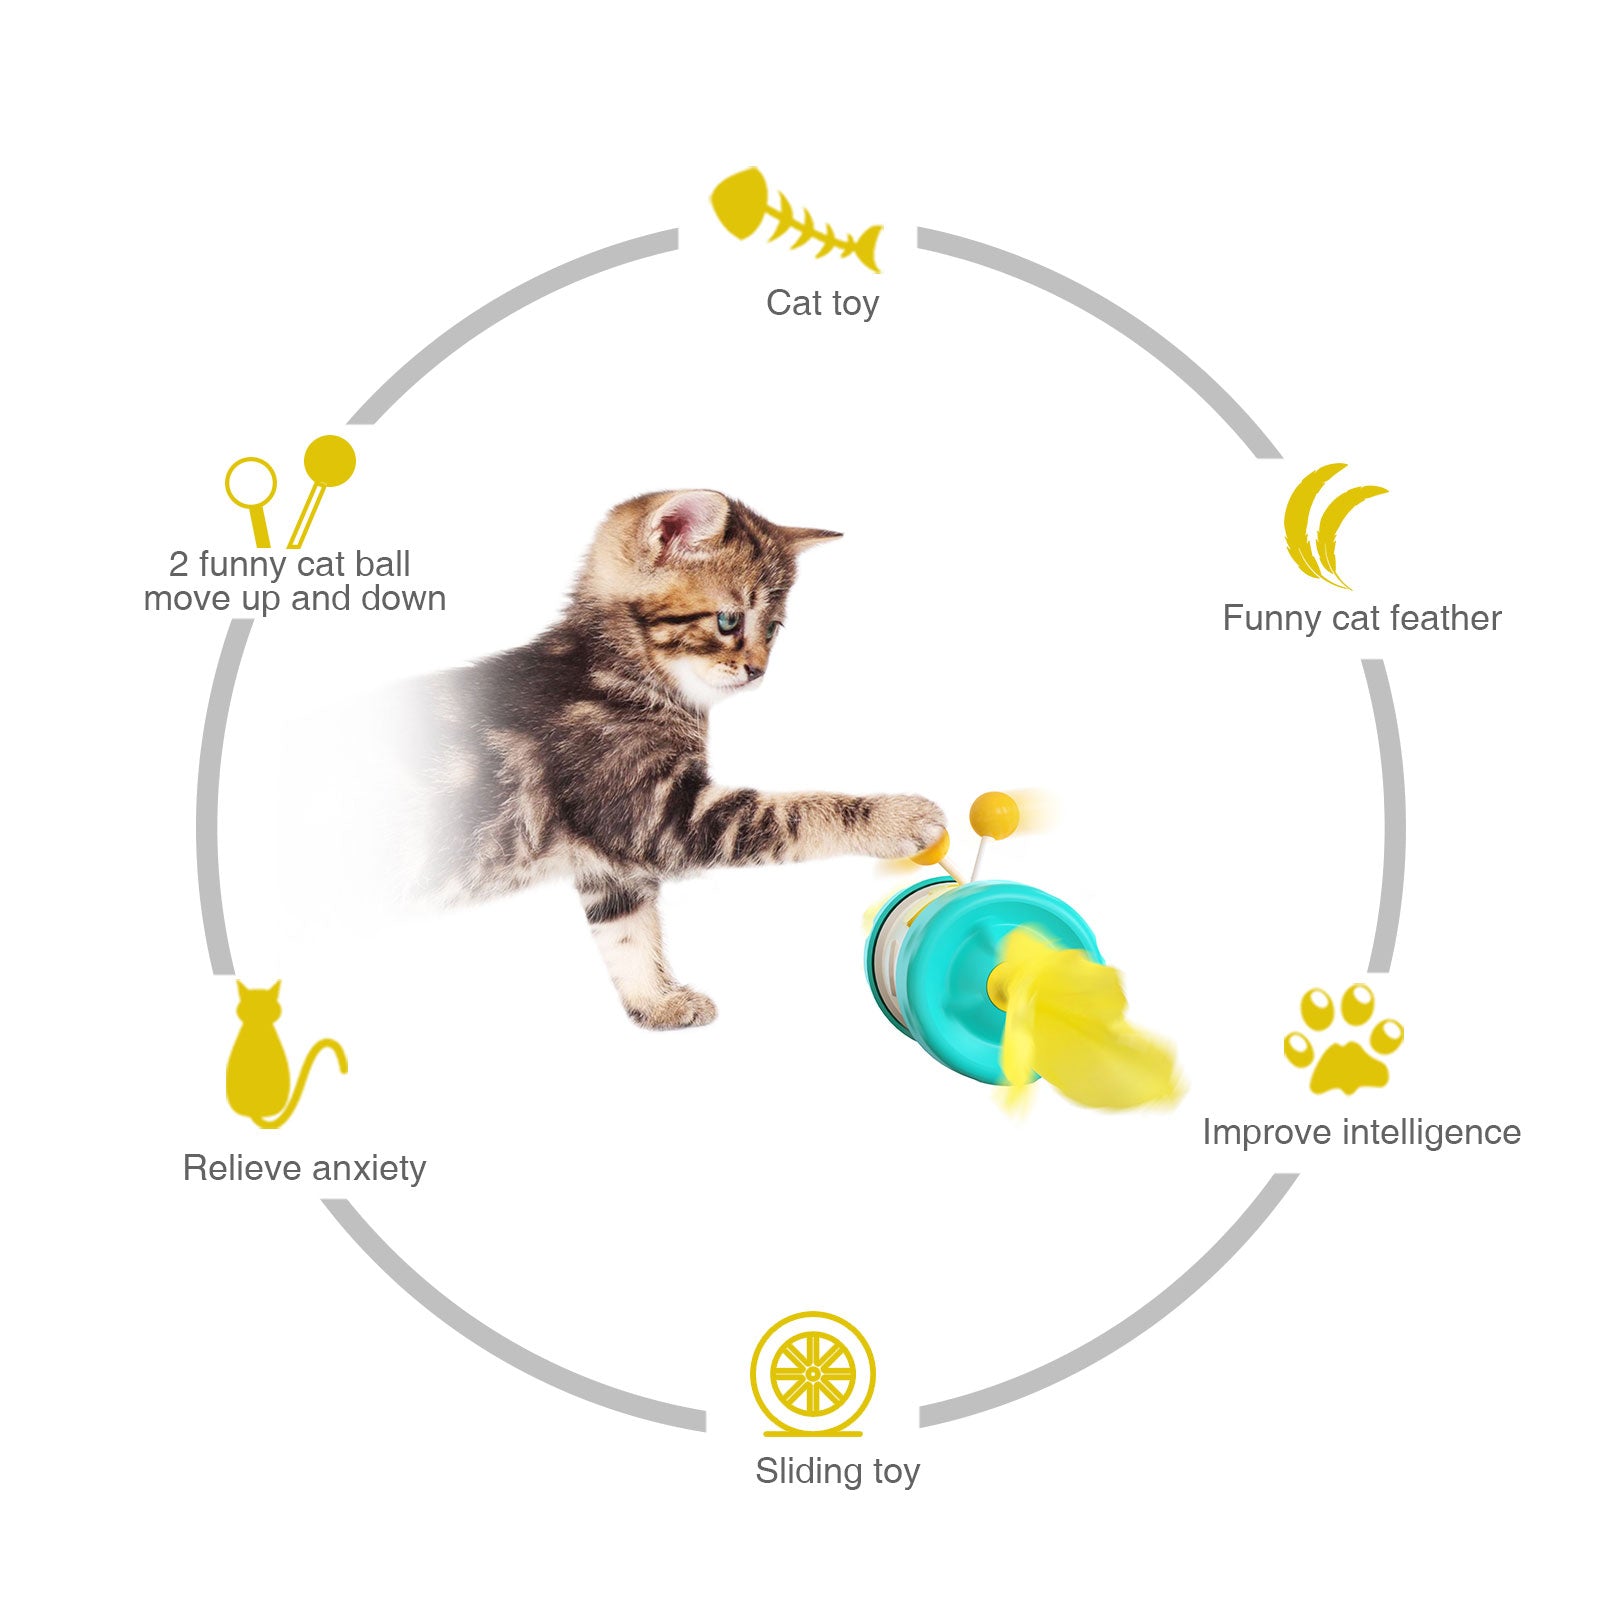 Cat Toys, Windmill Leaking Food Toy Interactive Cat Toys For Indoor Cats  With Suction Cupcat Spring Cat Bell Ball